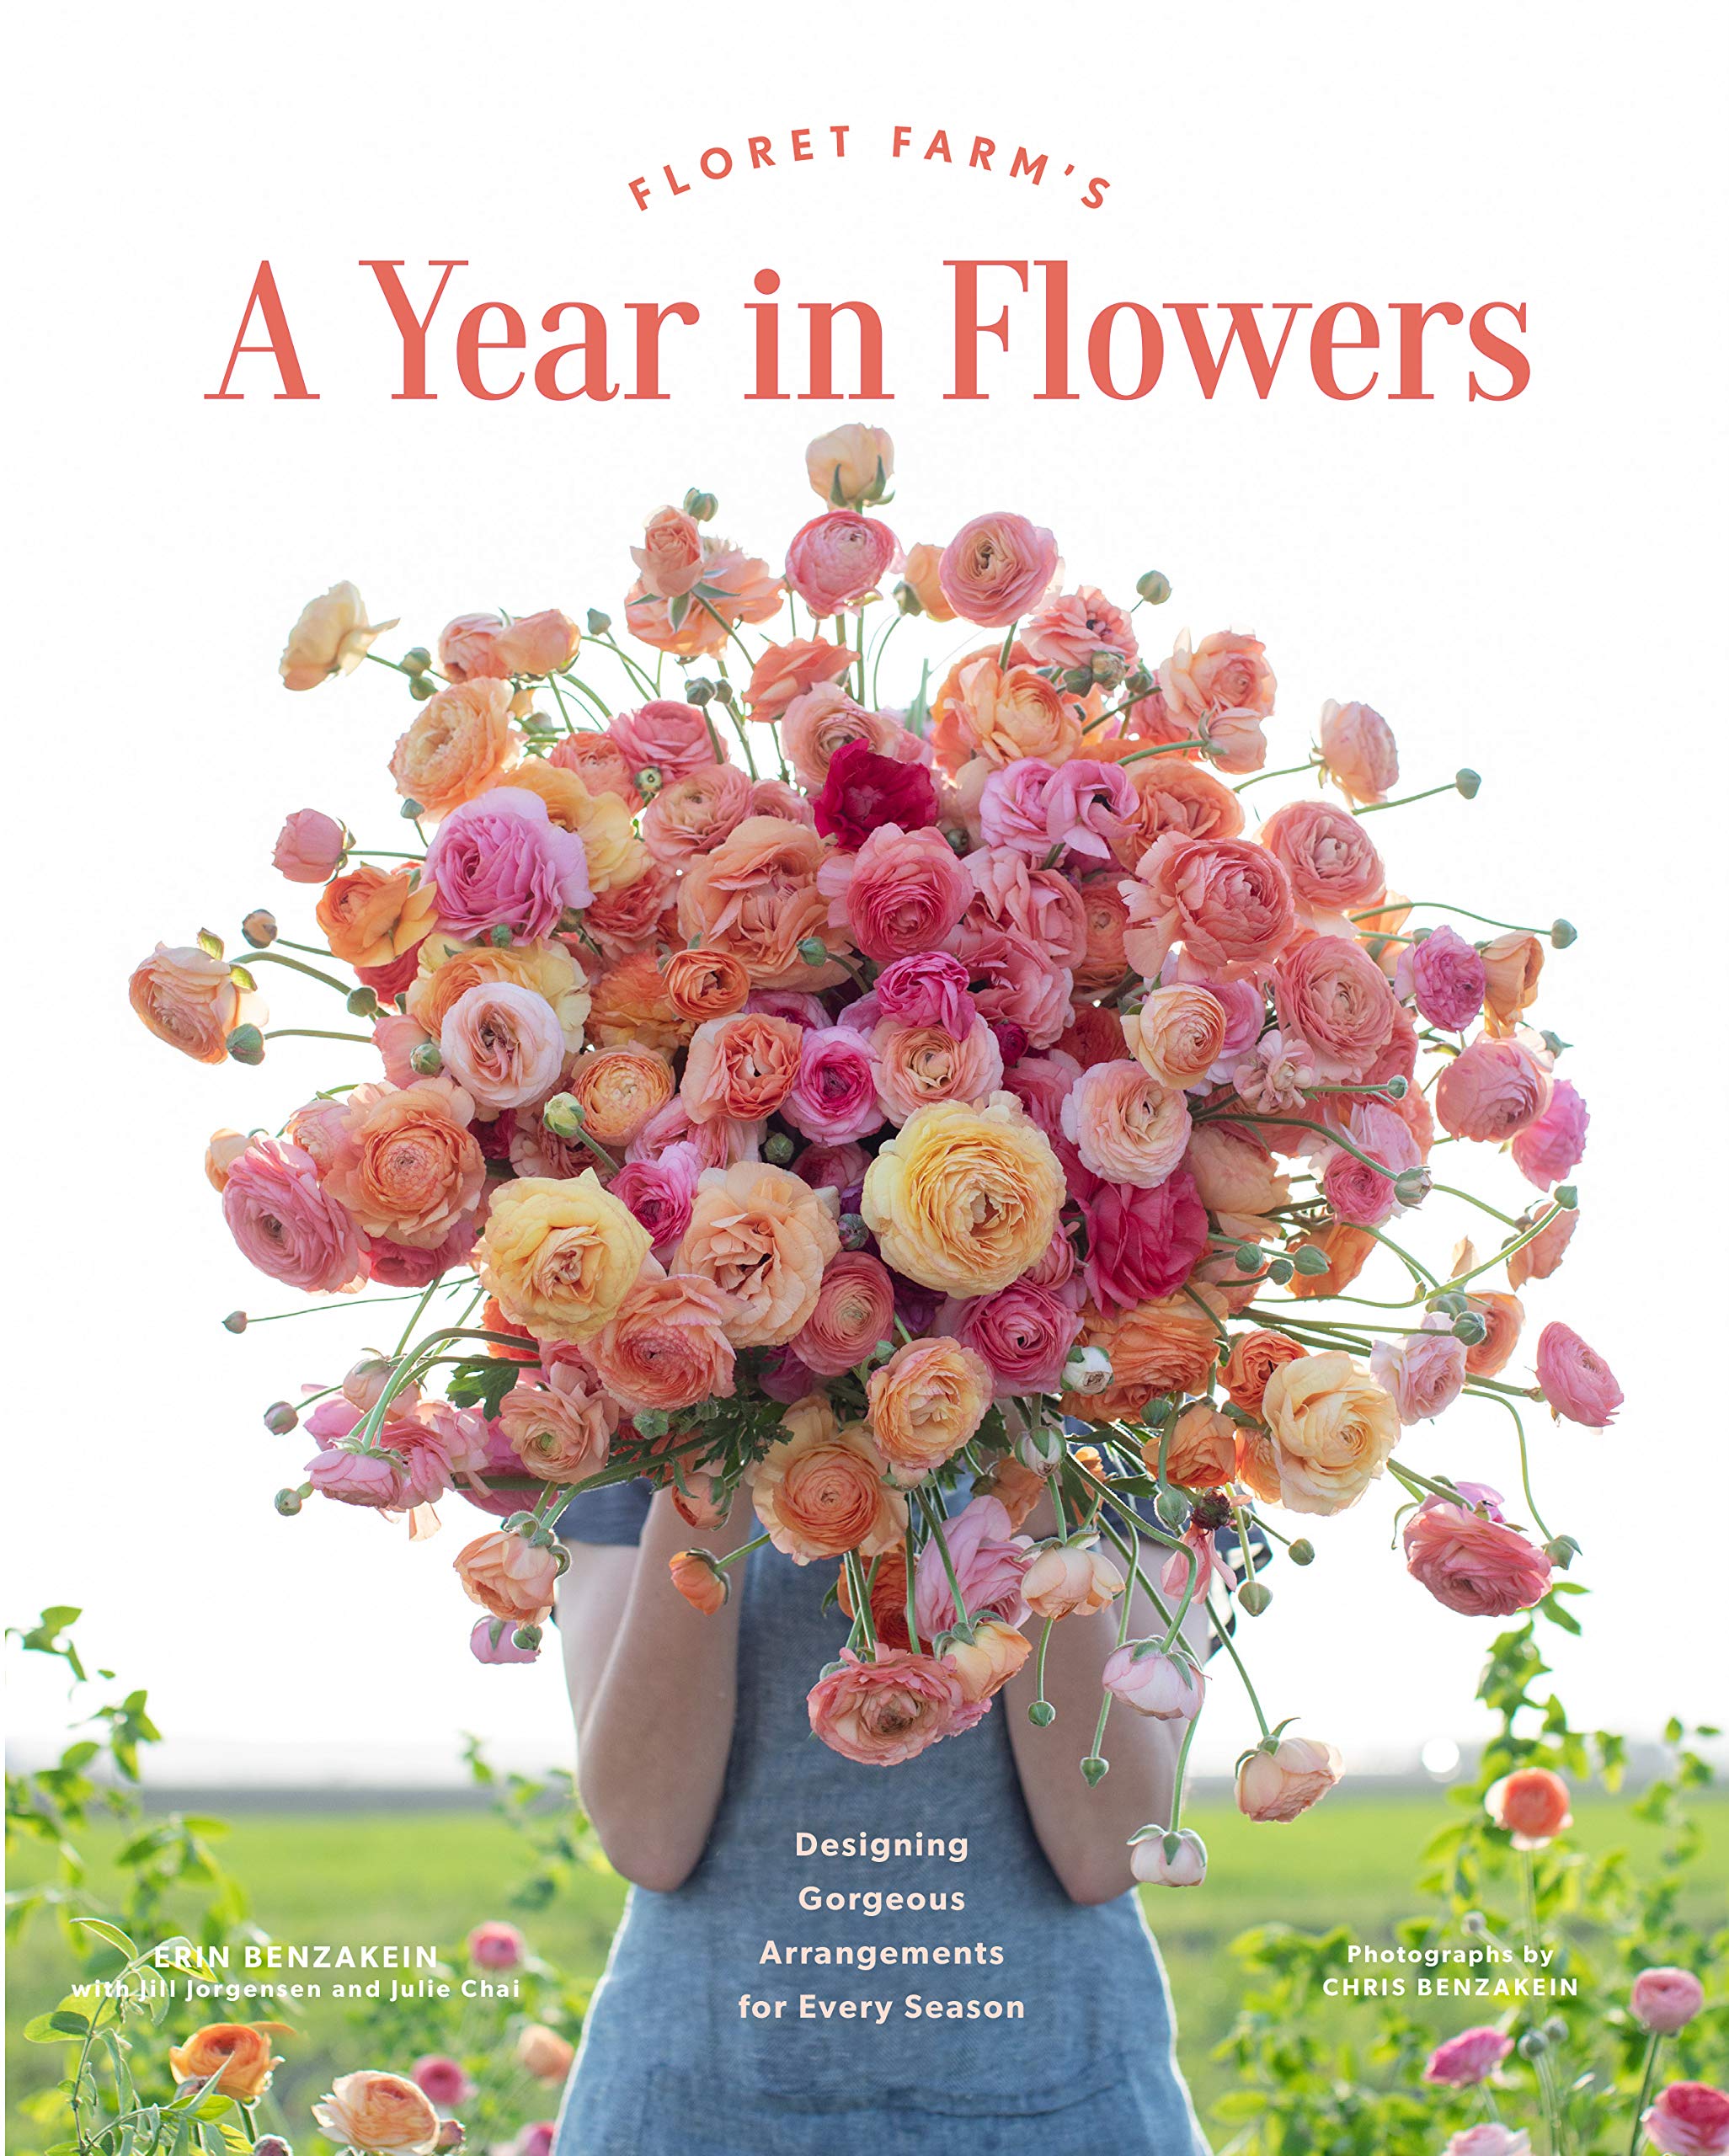 Floret Farm's A Year in Flowers: Designing Gorgeous Arrangements For Every Season